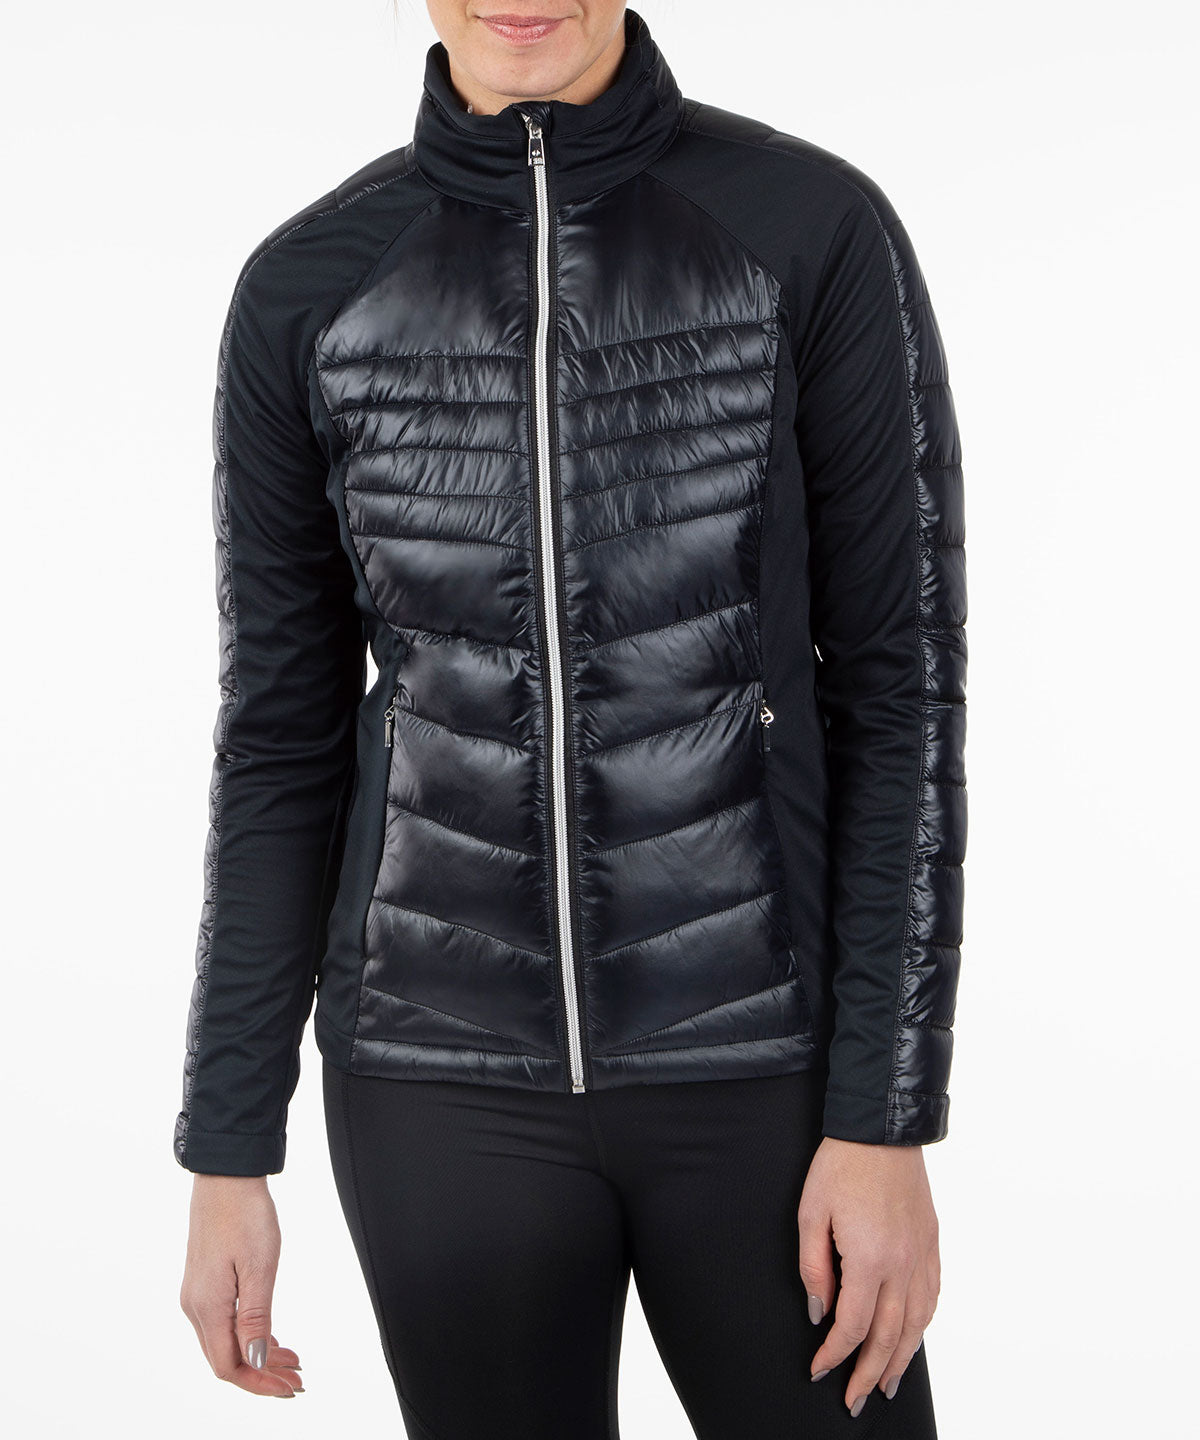 Women's Cheryl Thermal 3M Stretch Quilted Jacket - Sunice